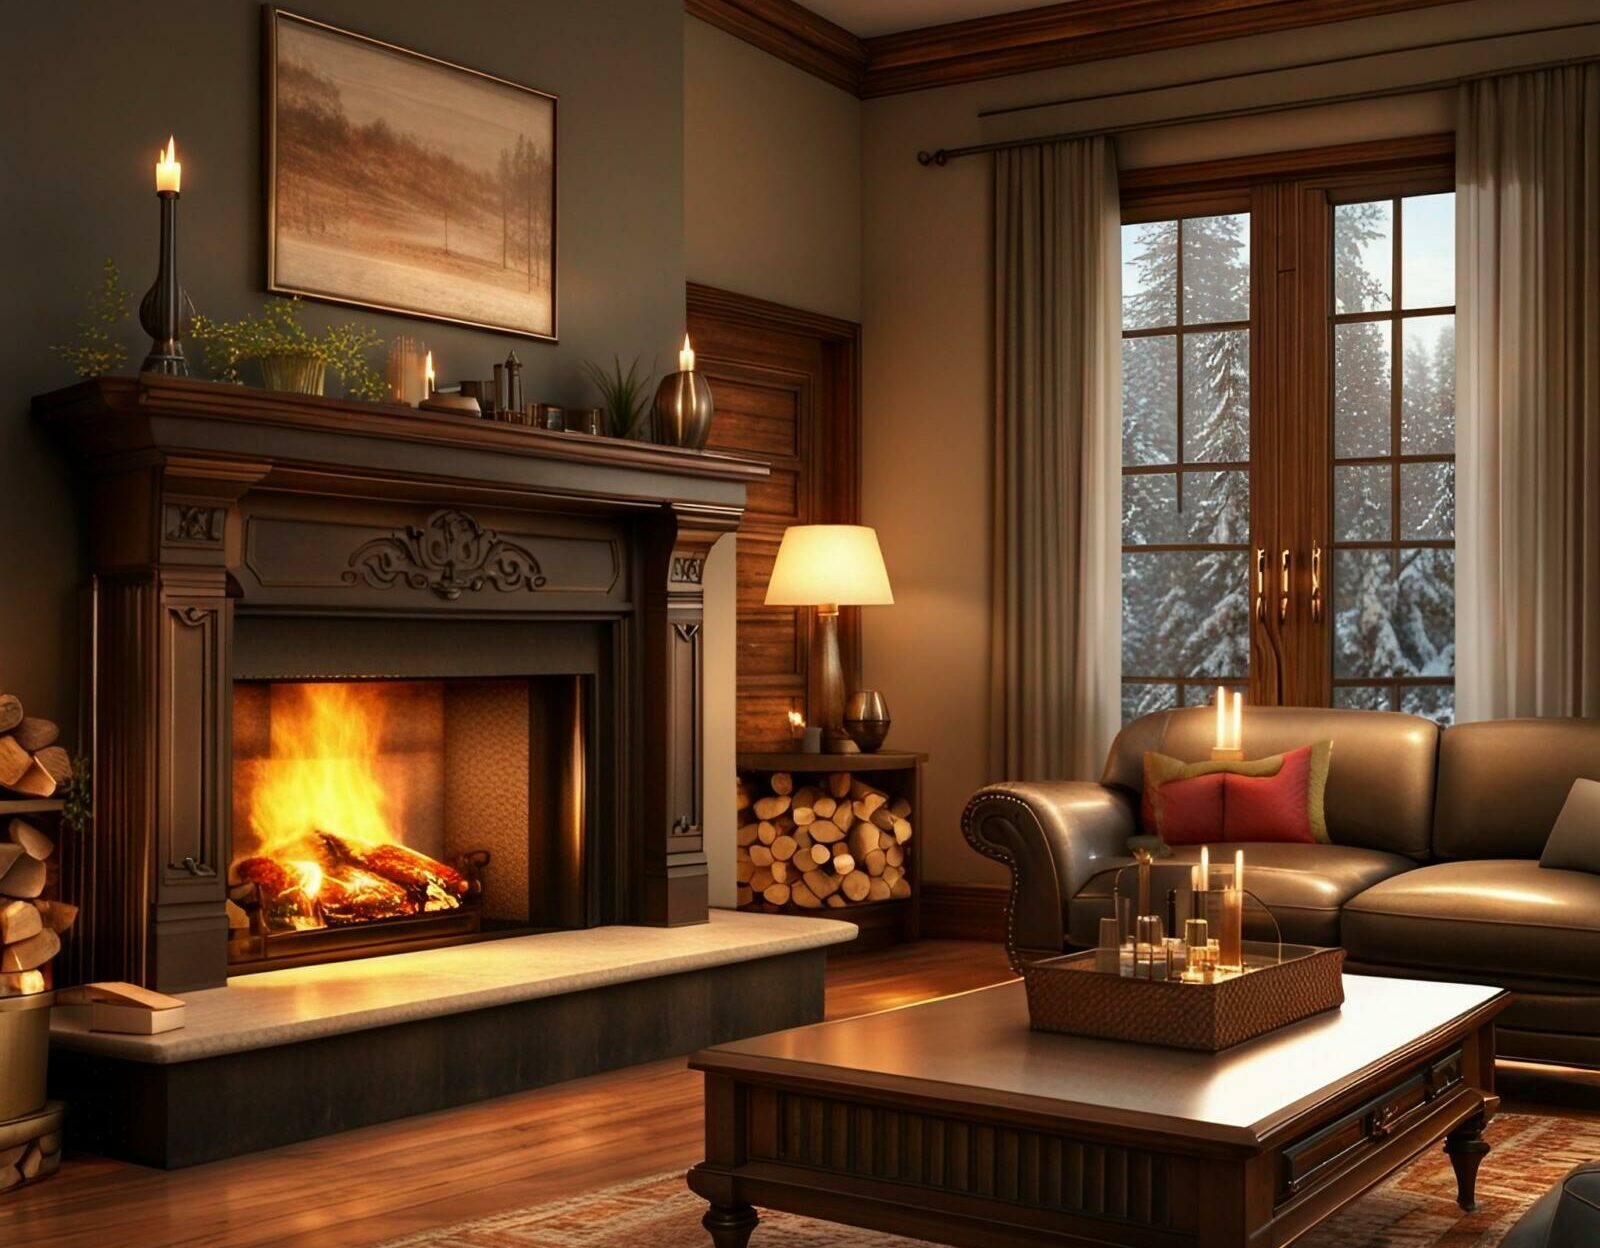 A cozy living room with a traditional fireplace and comfortable couches.